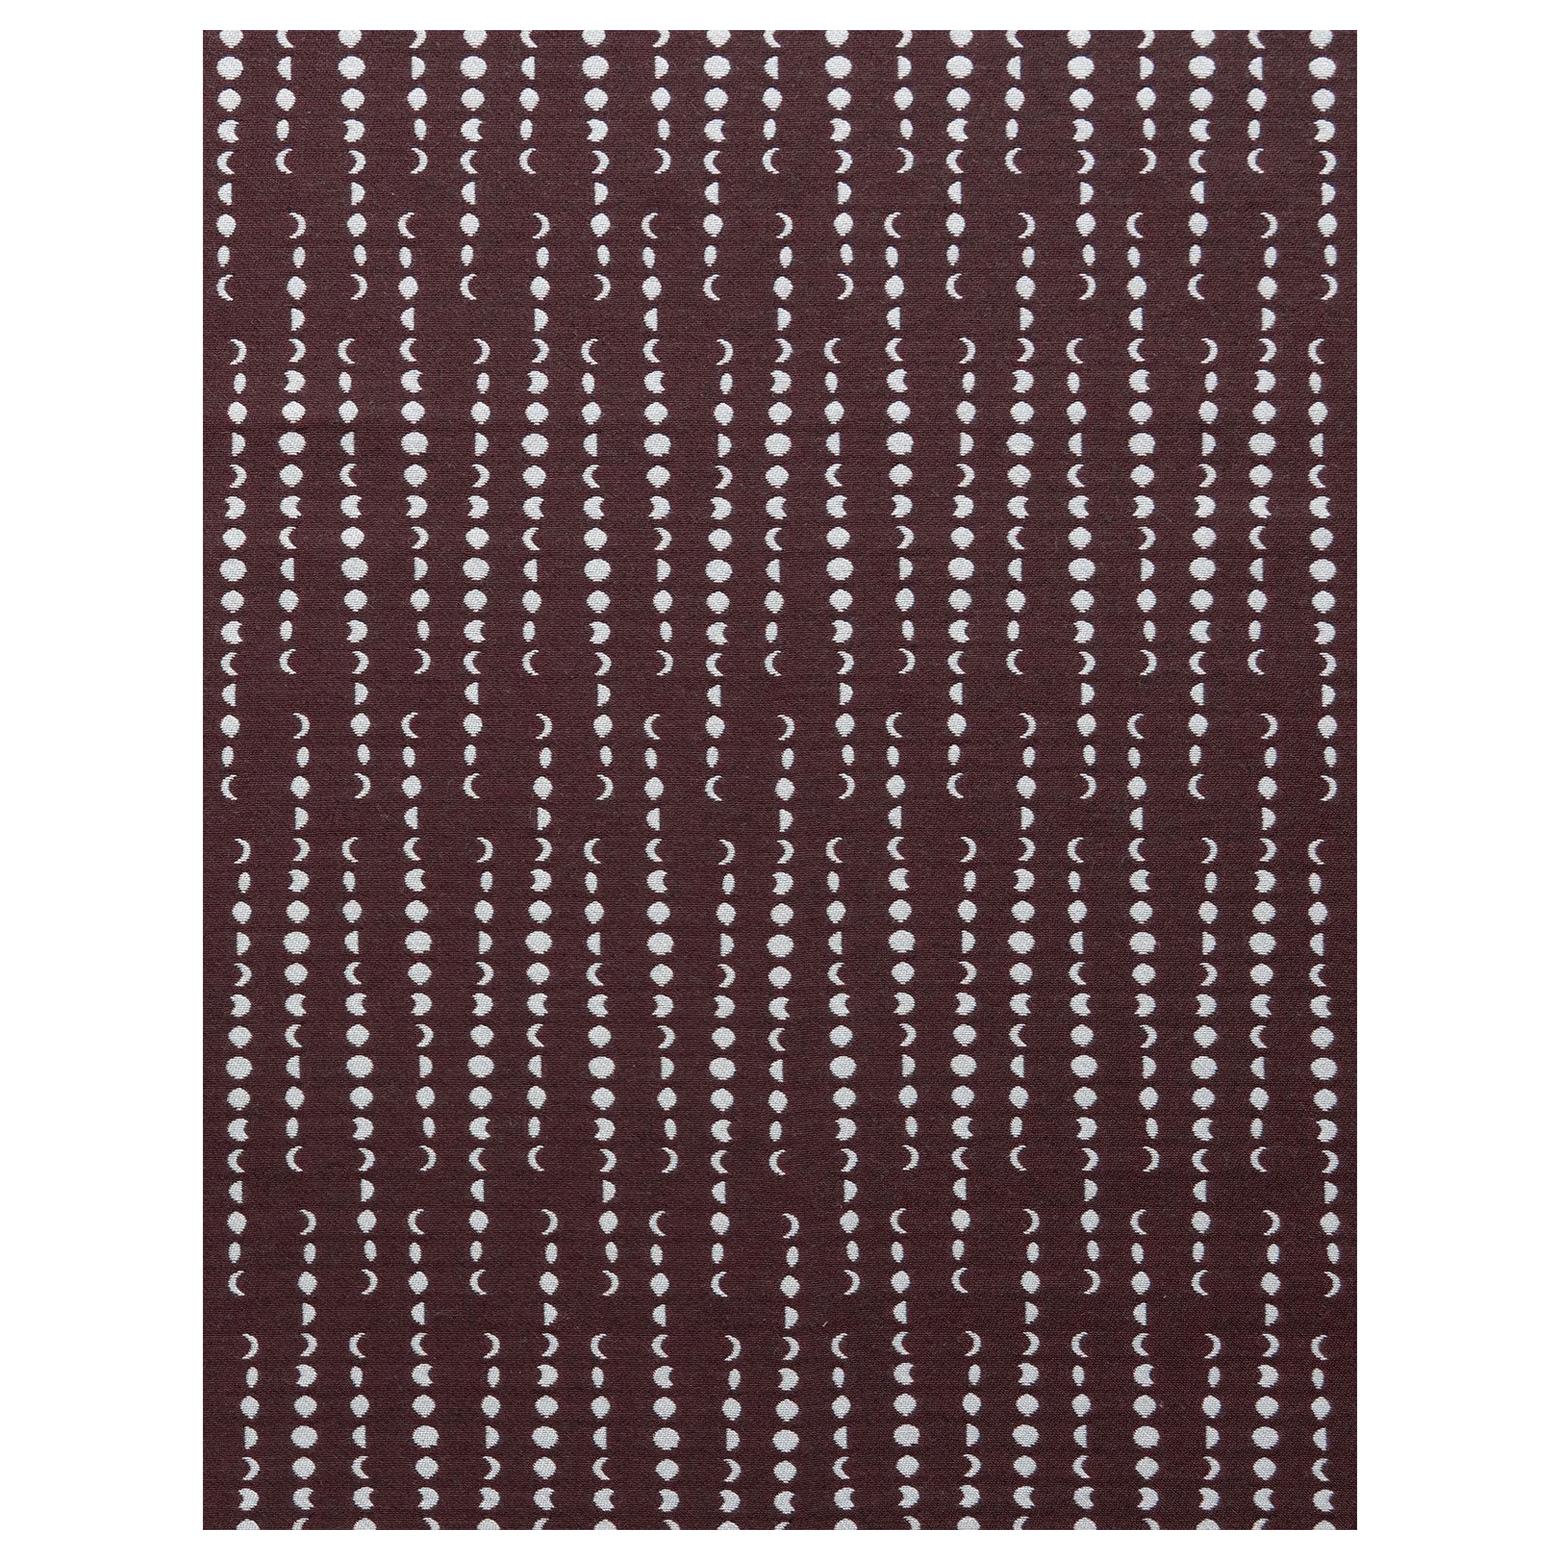 Earthlight Moon Woven Commercial Grade Fabric in Astra, Gray and Burgundy